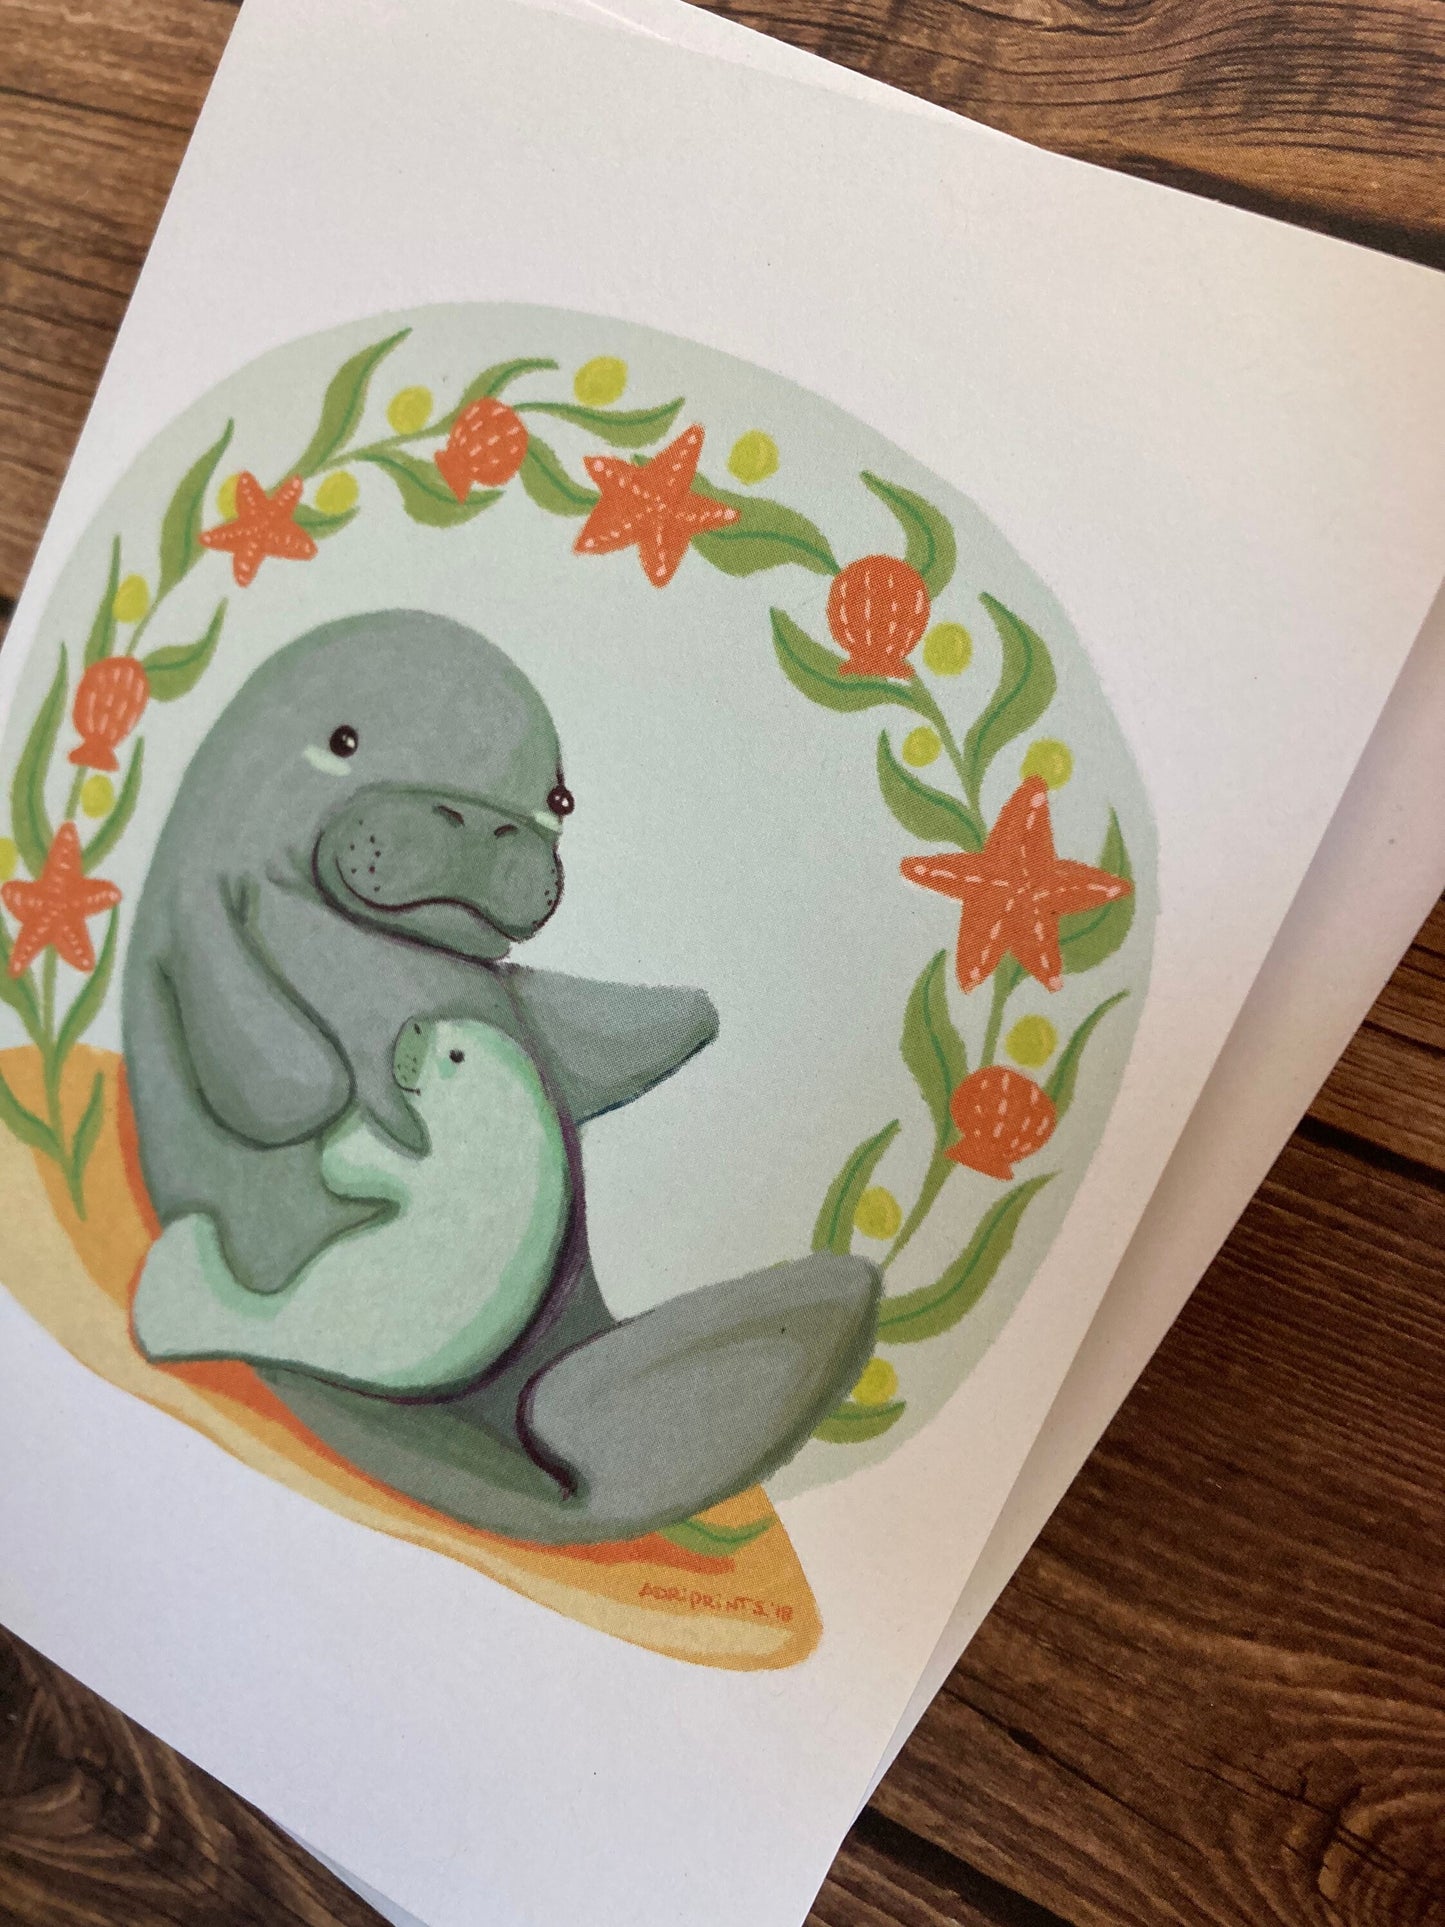 LOVE - Manatee Mama - Greeting Card for new parents, Mother's Day, Father's Day, new families, eco-friendly notecards by Adriana Bergstrom